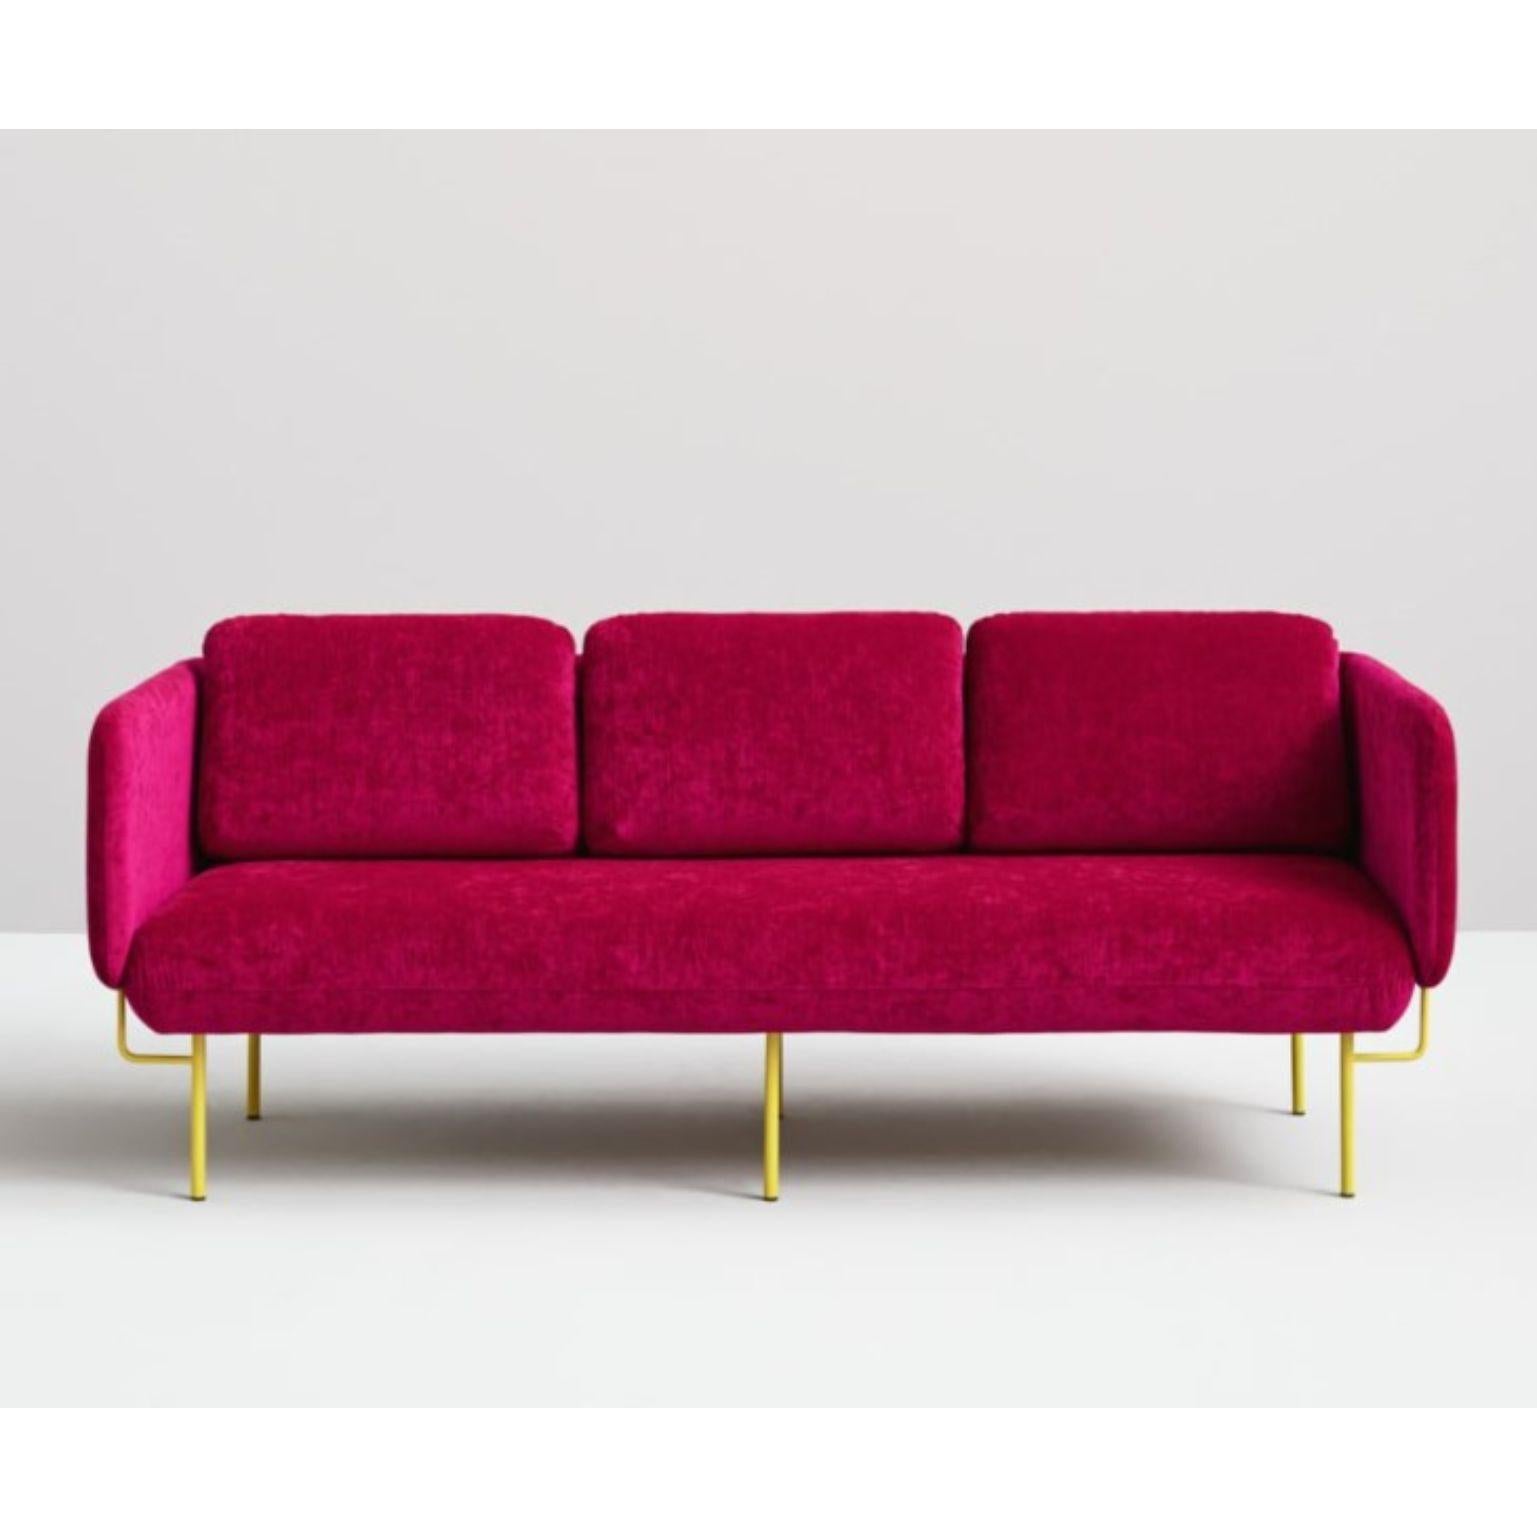 Pink Alce sofa - large by Chris Hardy
Dimensions: W200, D88, H82, Seat45 (3 Seaters)
Materials: Iron structure and MDF board
Painted or chromed legs
Foam CMHR (high resilience and flame retardant) for all our cushion filling